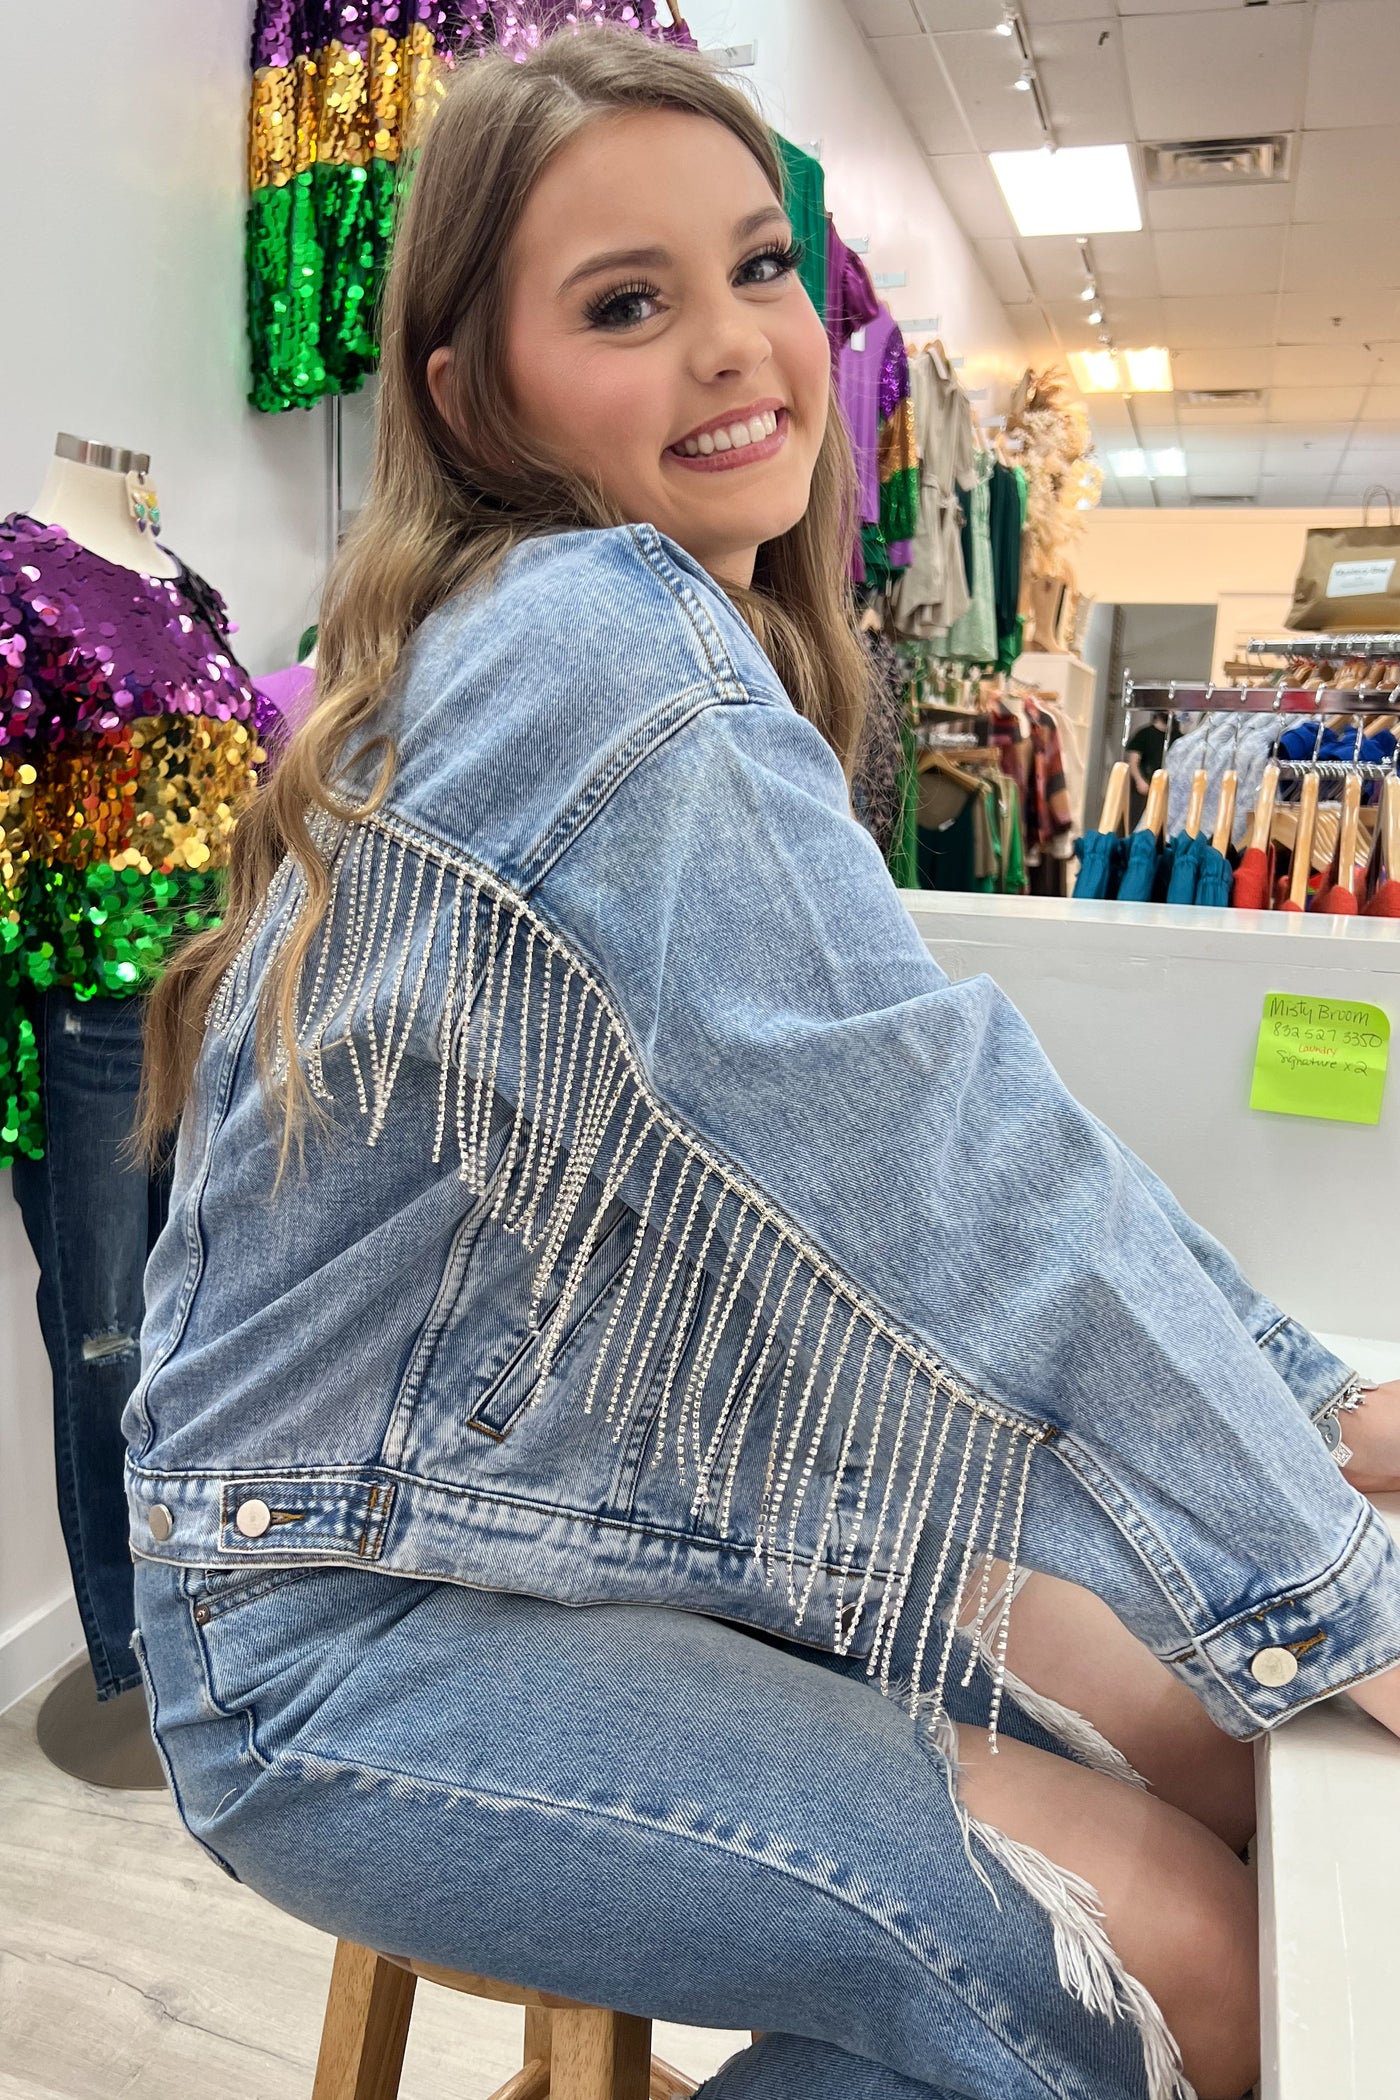 "Steal The Show" Denim Jacket - Happily Ever Aften